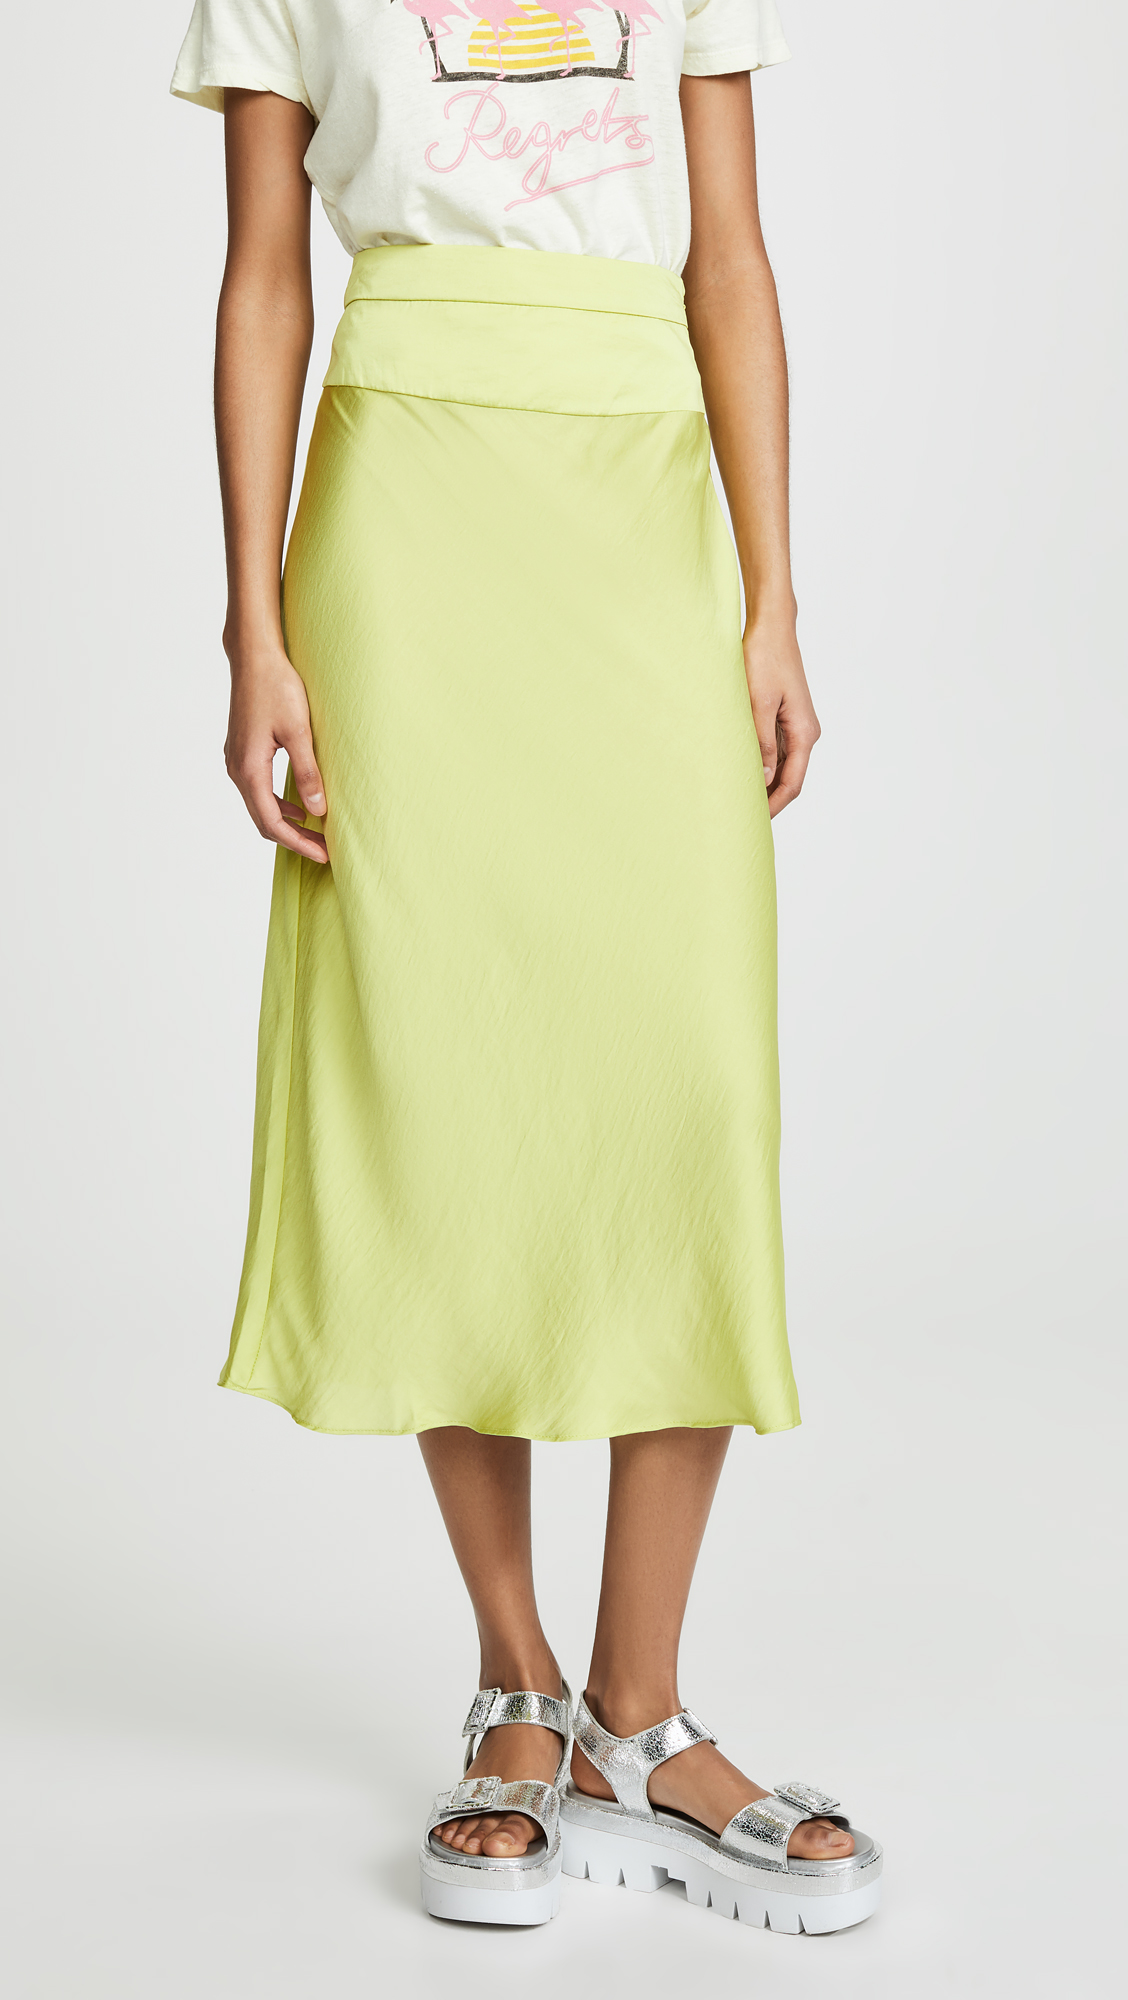 Chartreuse Is the Only Neon You Need for Fall - theFashionSpot